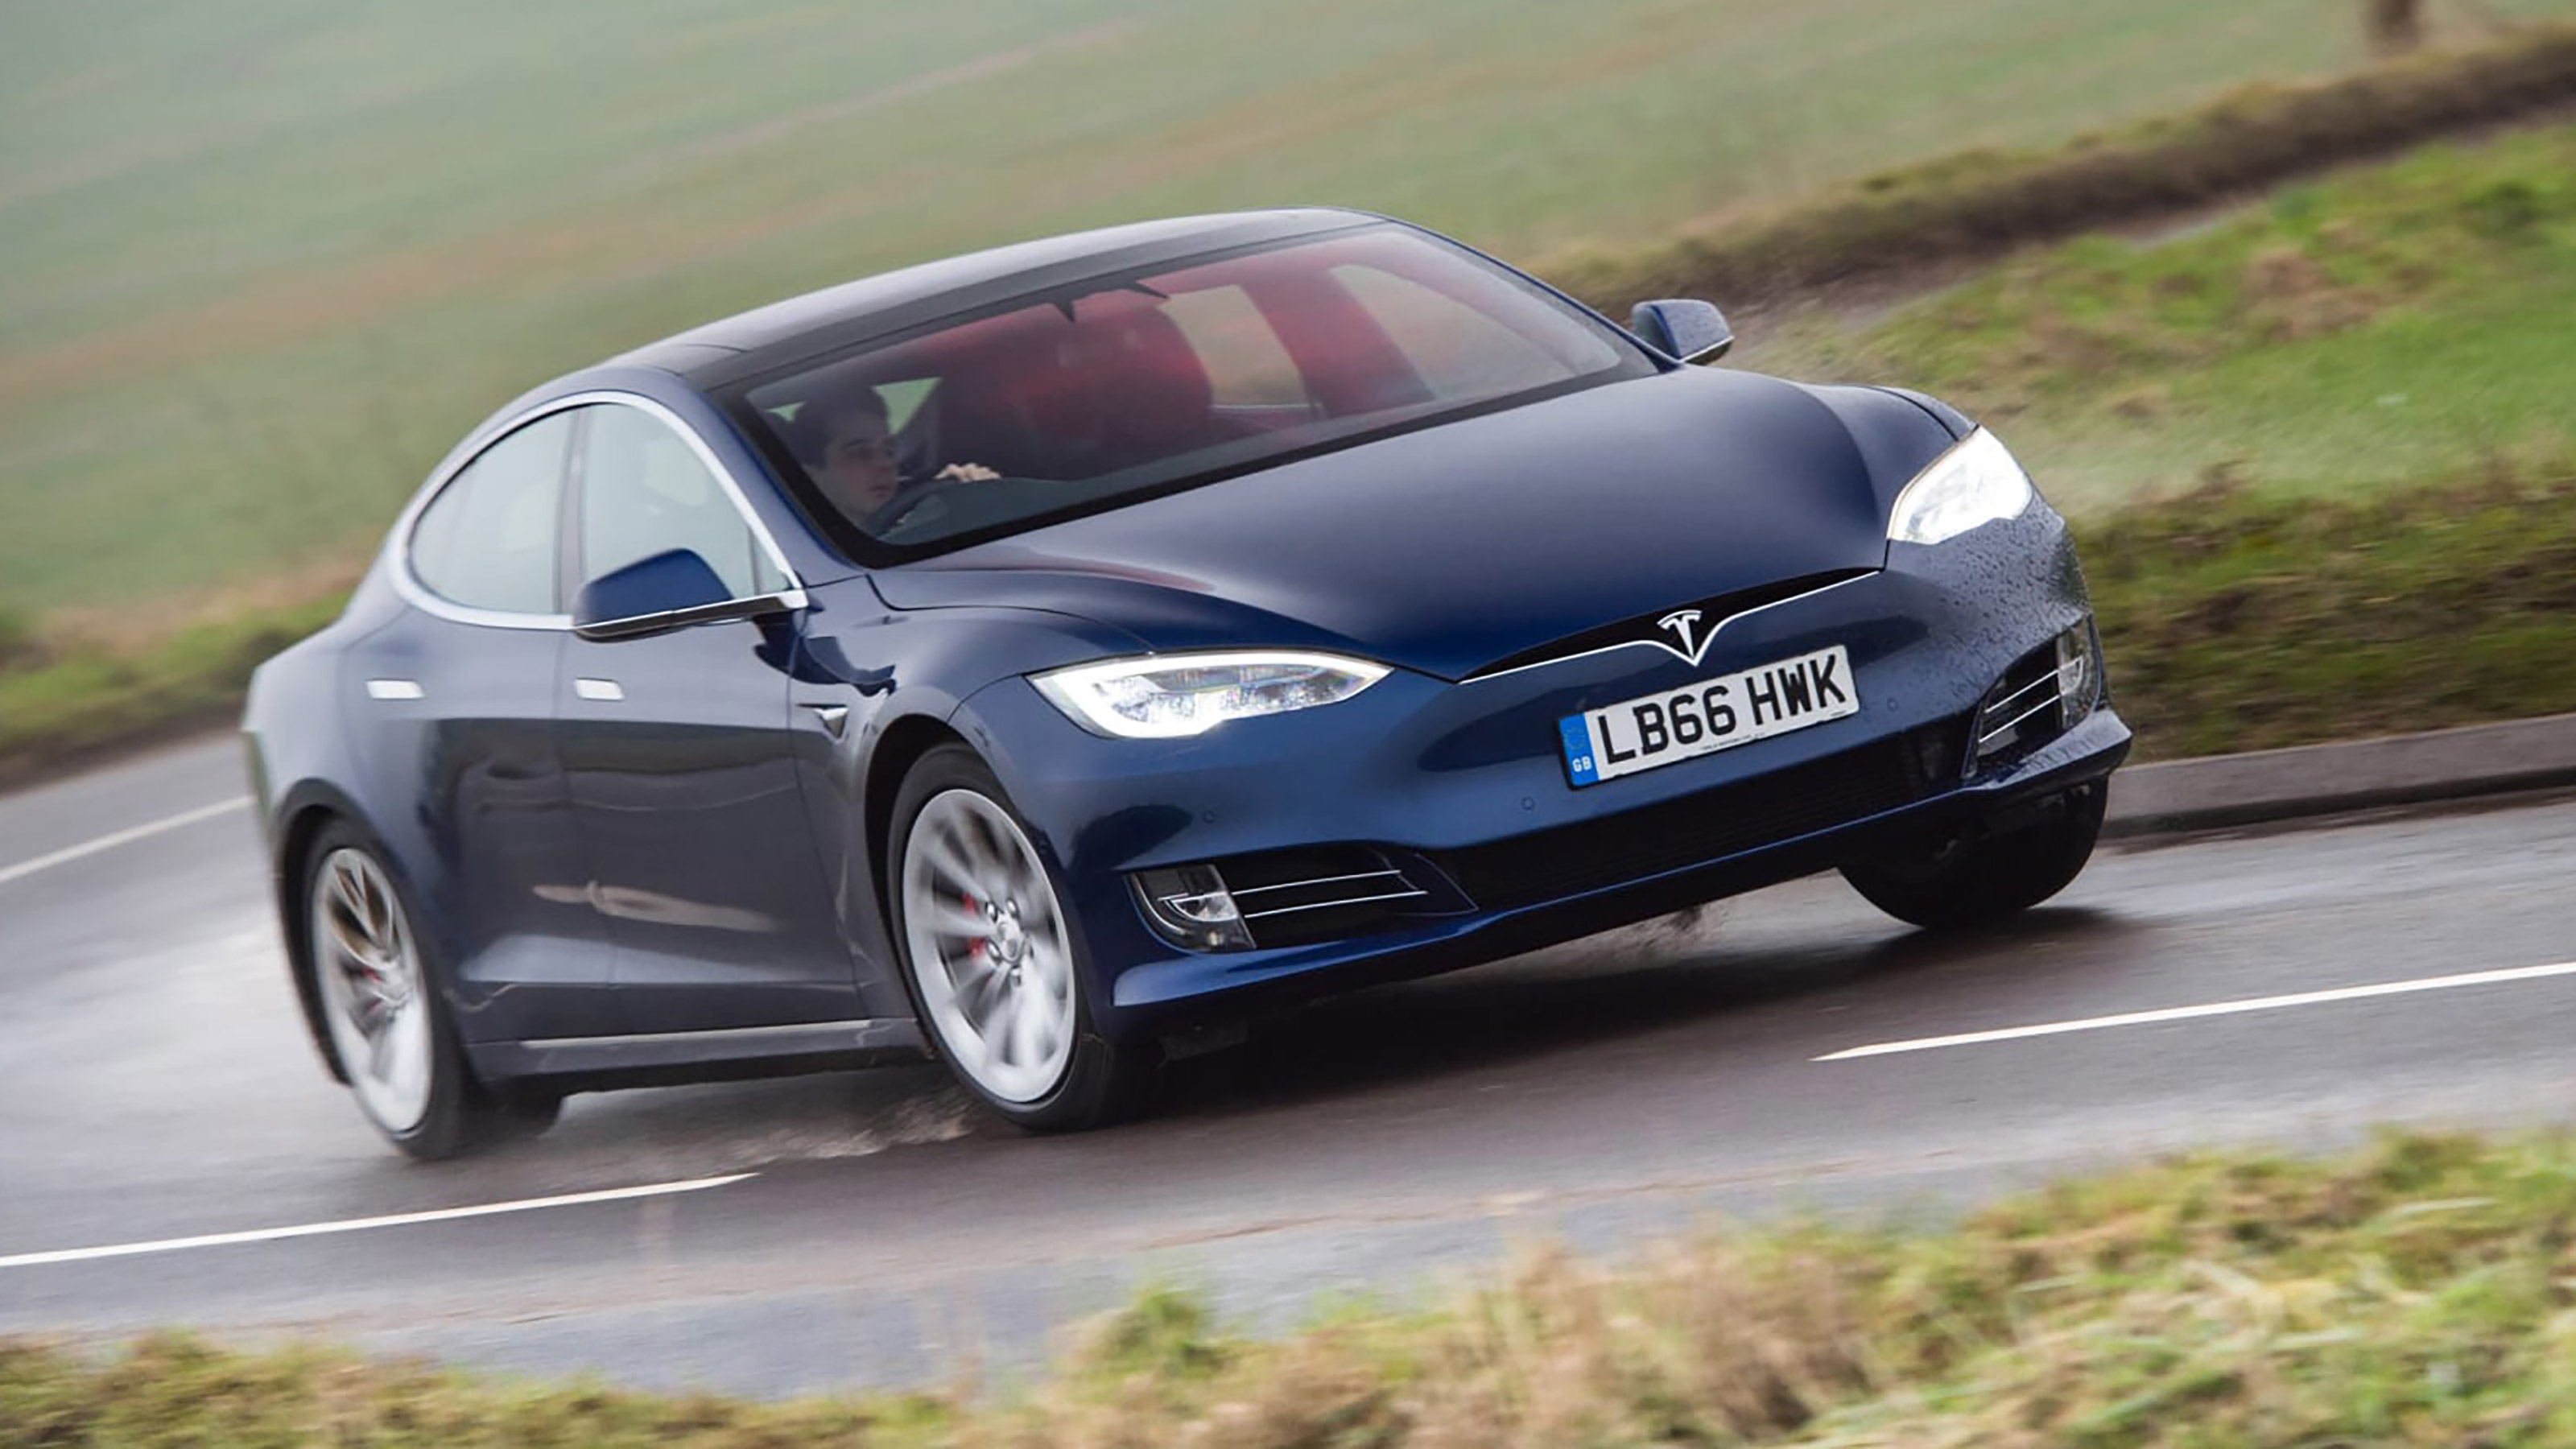 rolle oxiderer Dejlig Tesla Model S review - prices, specs and 0-60 time | evo